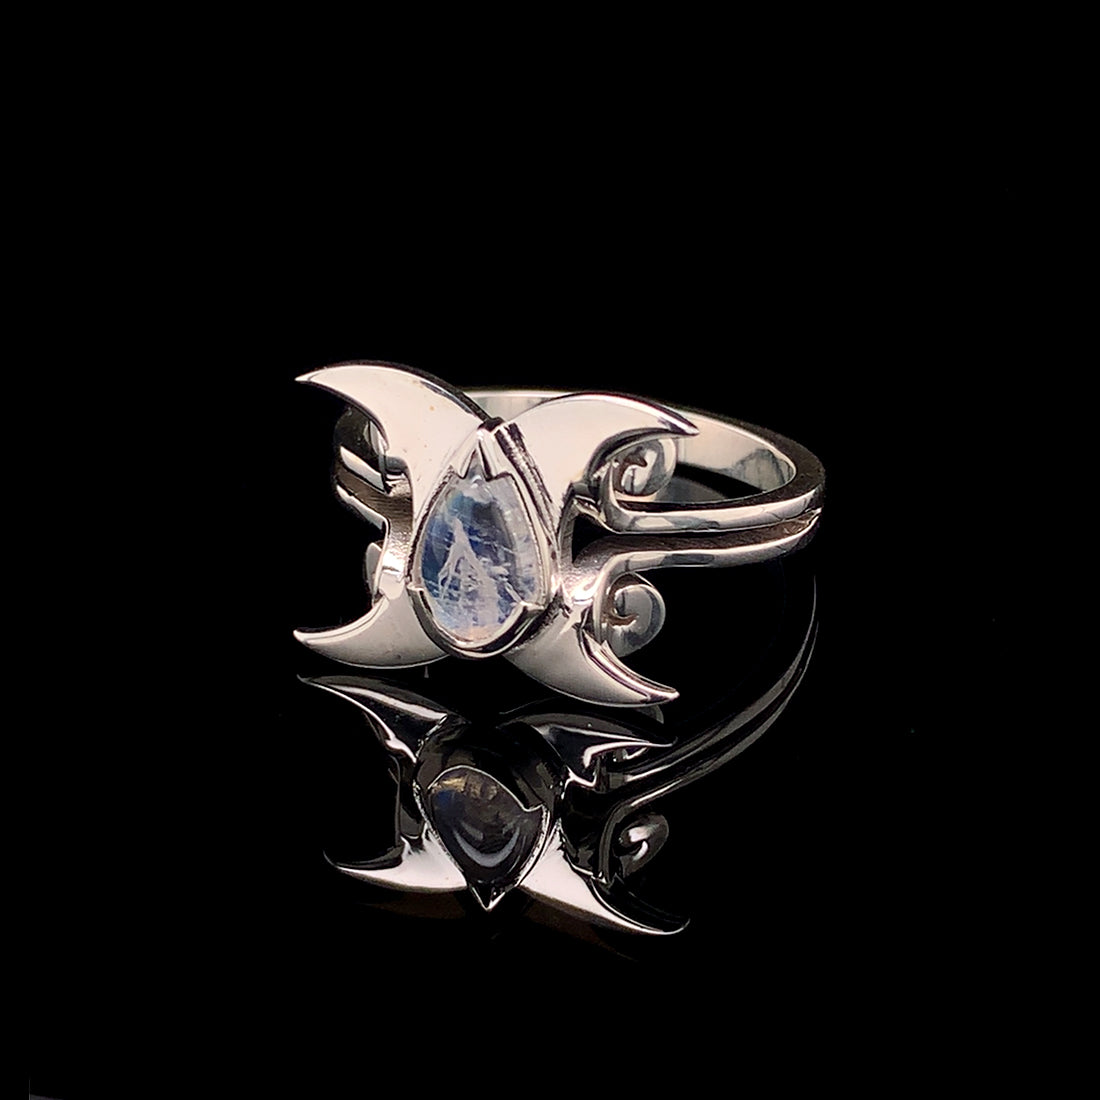 Adjustable Crescent Moon and Star Ring - 925 Sterling Silver - Moon Star  Sky NEW | eBay